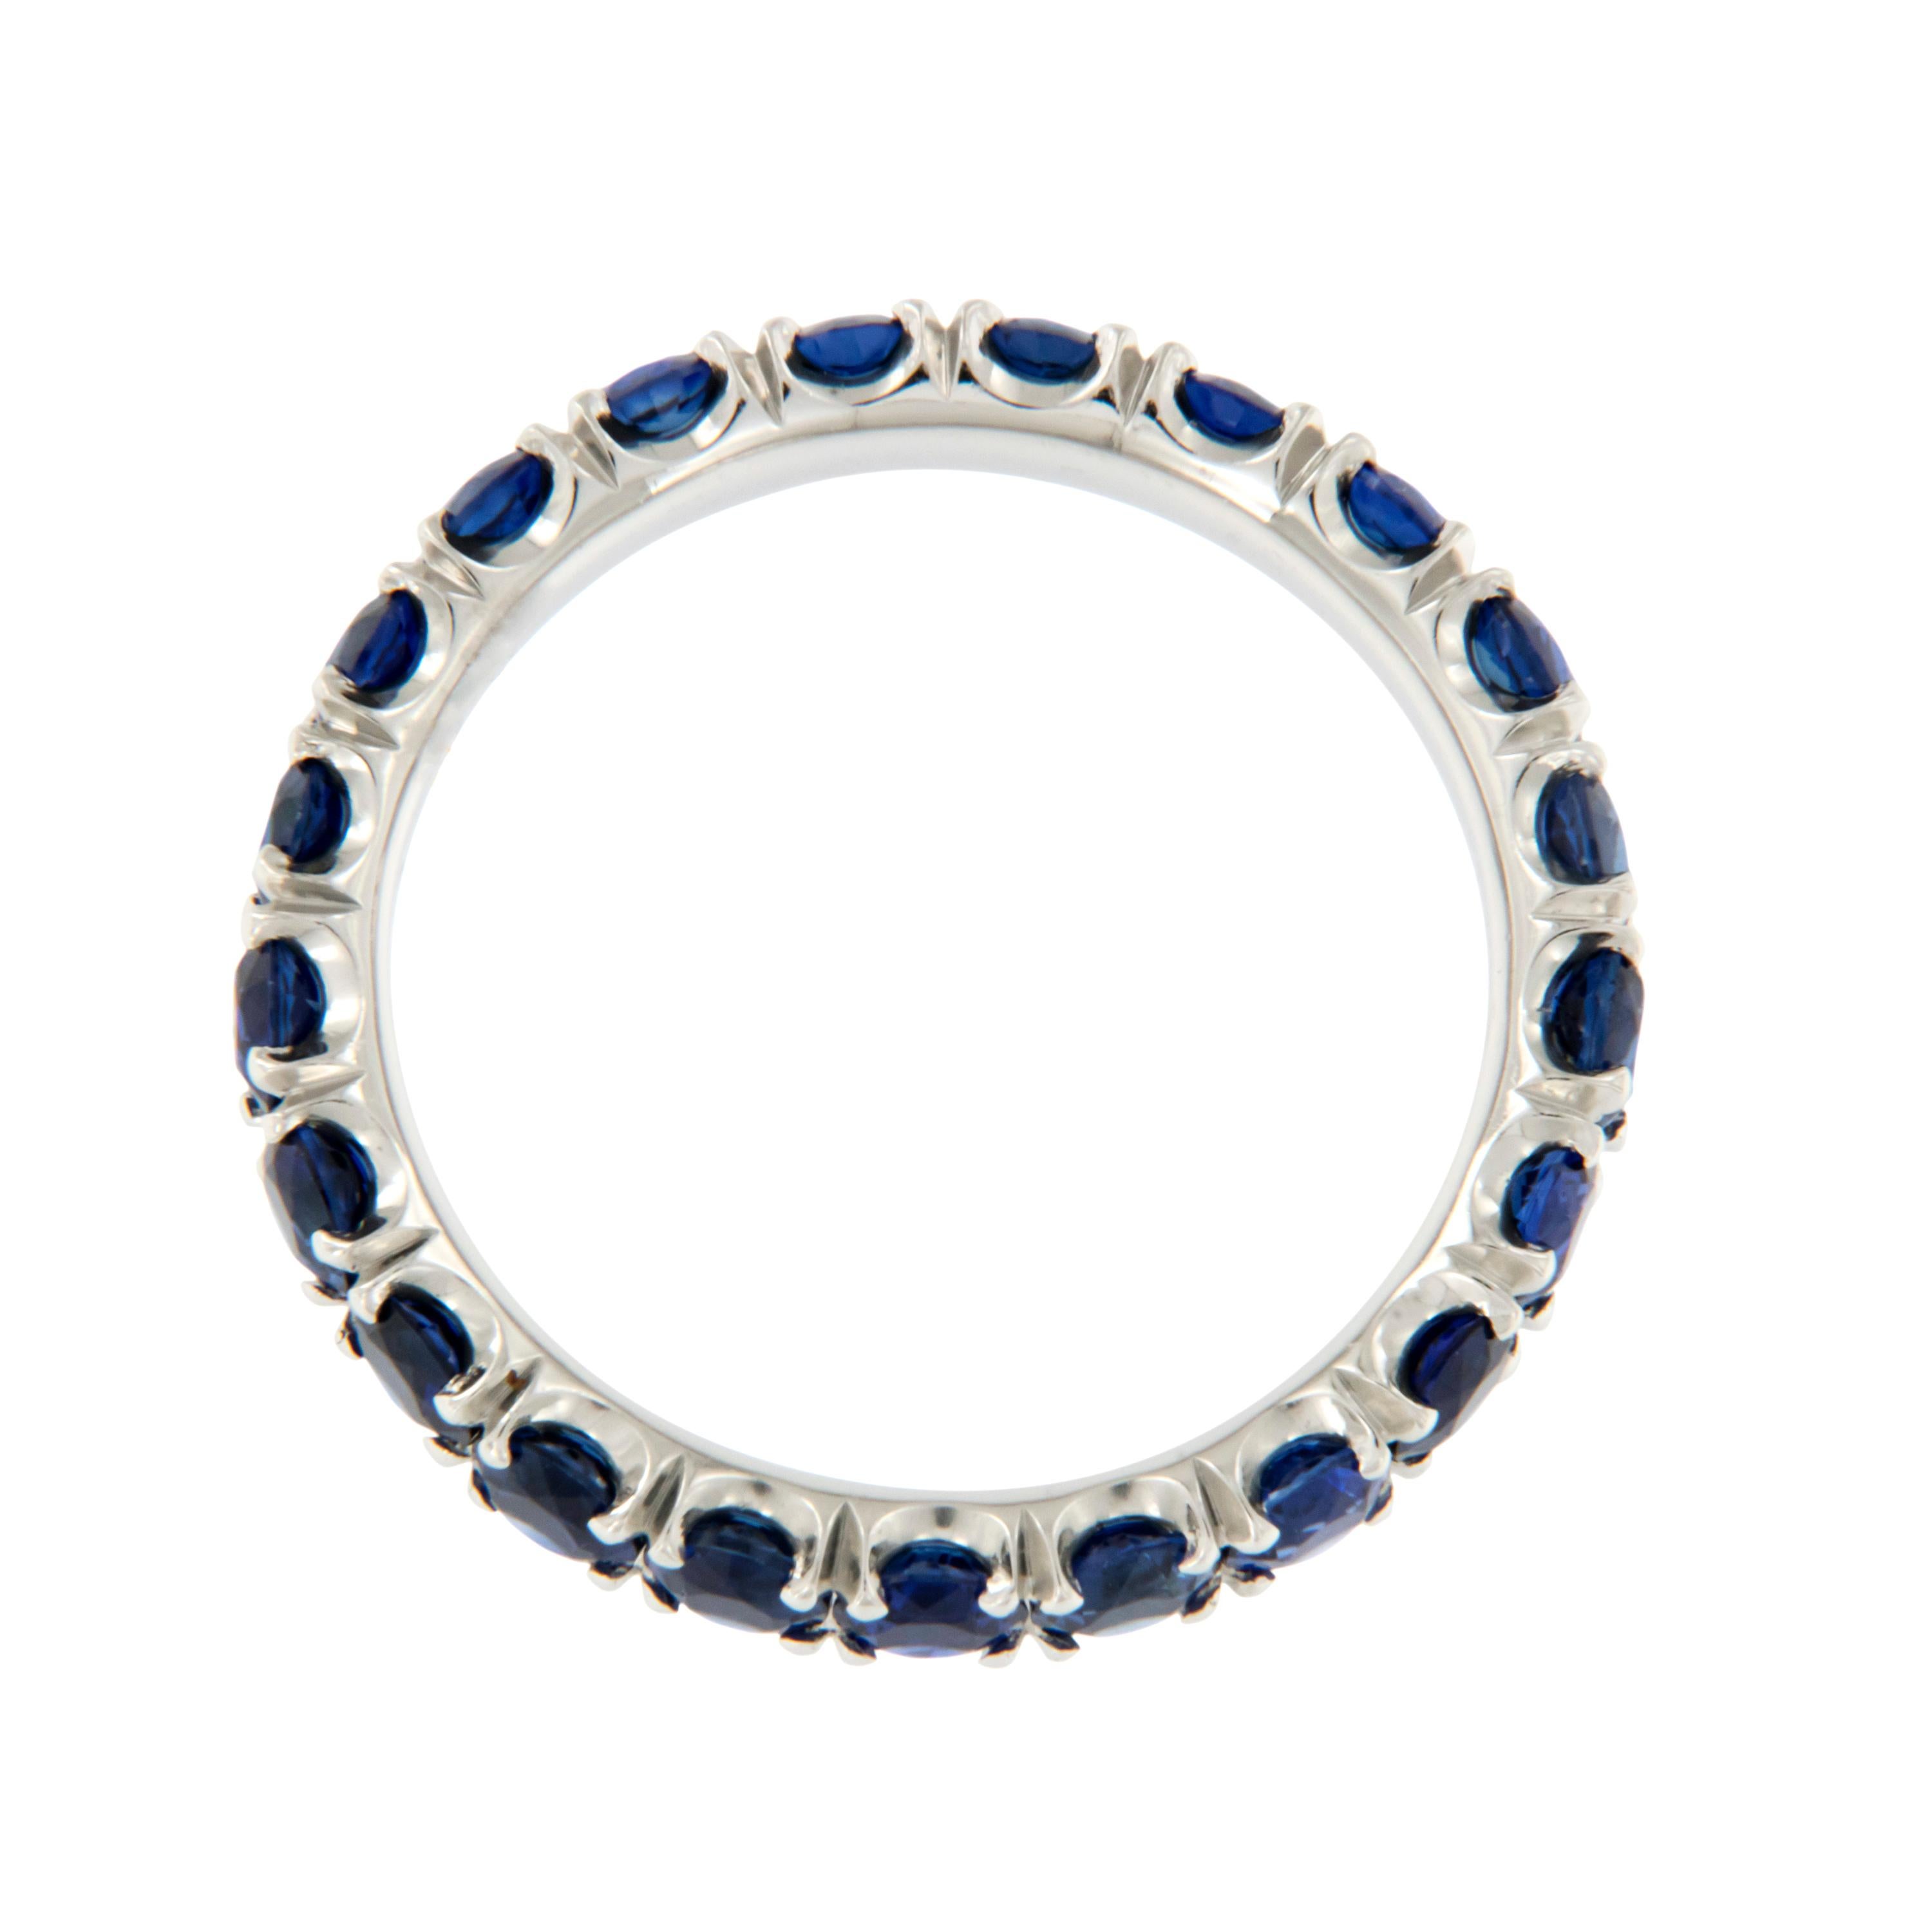 Women's Matched Set of Platinum 5.40 Cttw Blue Sapphire Eternity Bands by WR Designs